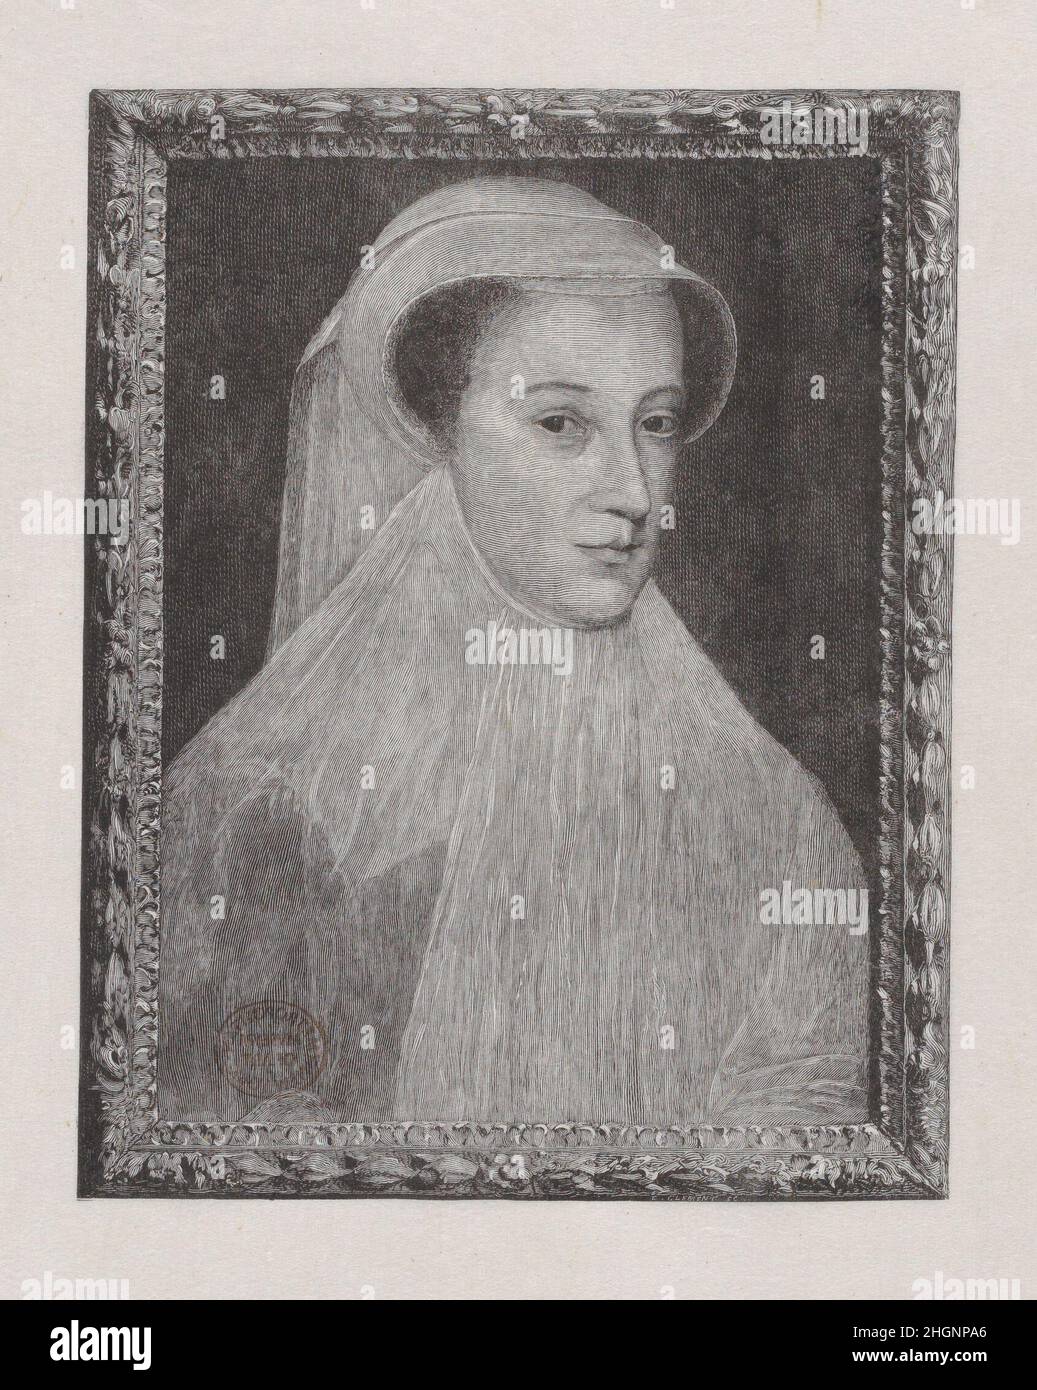 Mary, Queen of Scots second half 19th century After François Clouet French After a painting by François Clouet in the Royal Collection (RCIN 403429).This photogravure of a wood engraving appeared in Laurence Hutton, 'The Portraits of Mary, Queen of Scots' in The Century, vol. 37 (1889), p. 618 (with the portrait titled 'Janet's La Reine Blanche').. Mary, Queen of Scots. After François Clouet (French, Tours (?), active by 1536–died 1572 Paris). second half 19th century. Photogravure. Mary, Queen of Scots (British, Linlithgow 1542–1587 Fotheringhay). Prints Stock Photo